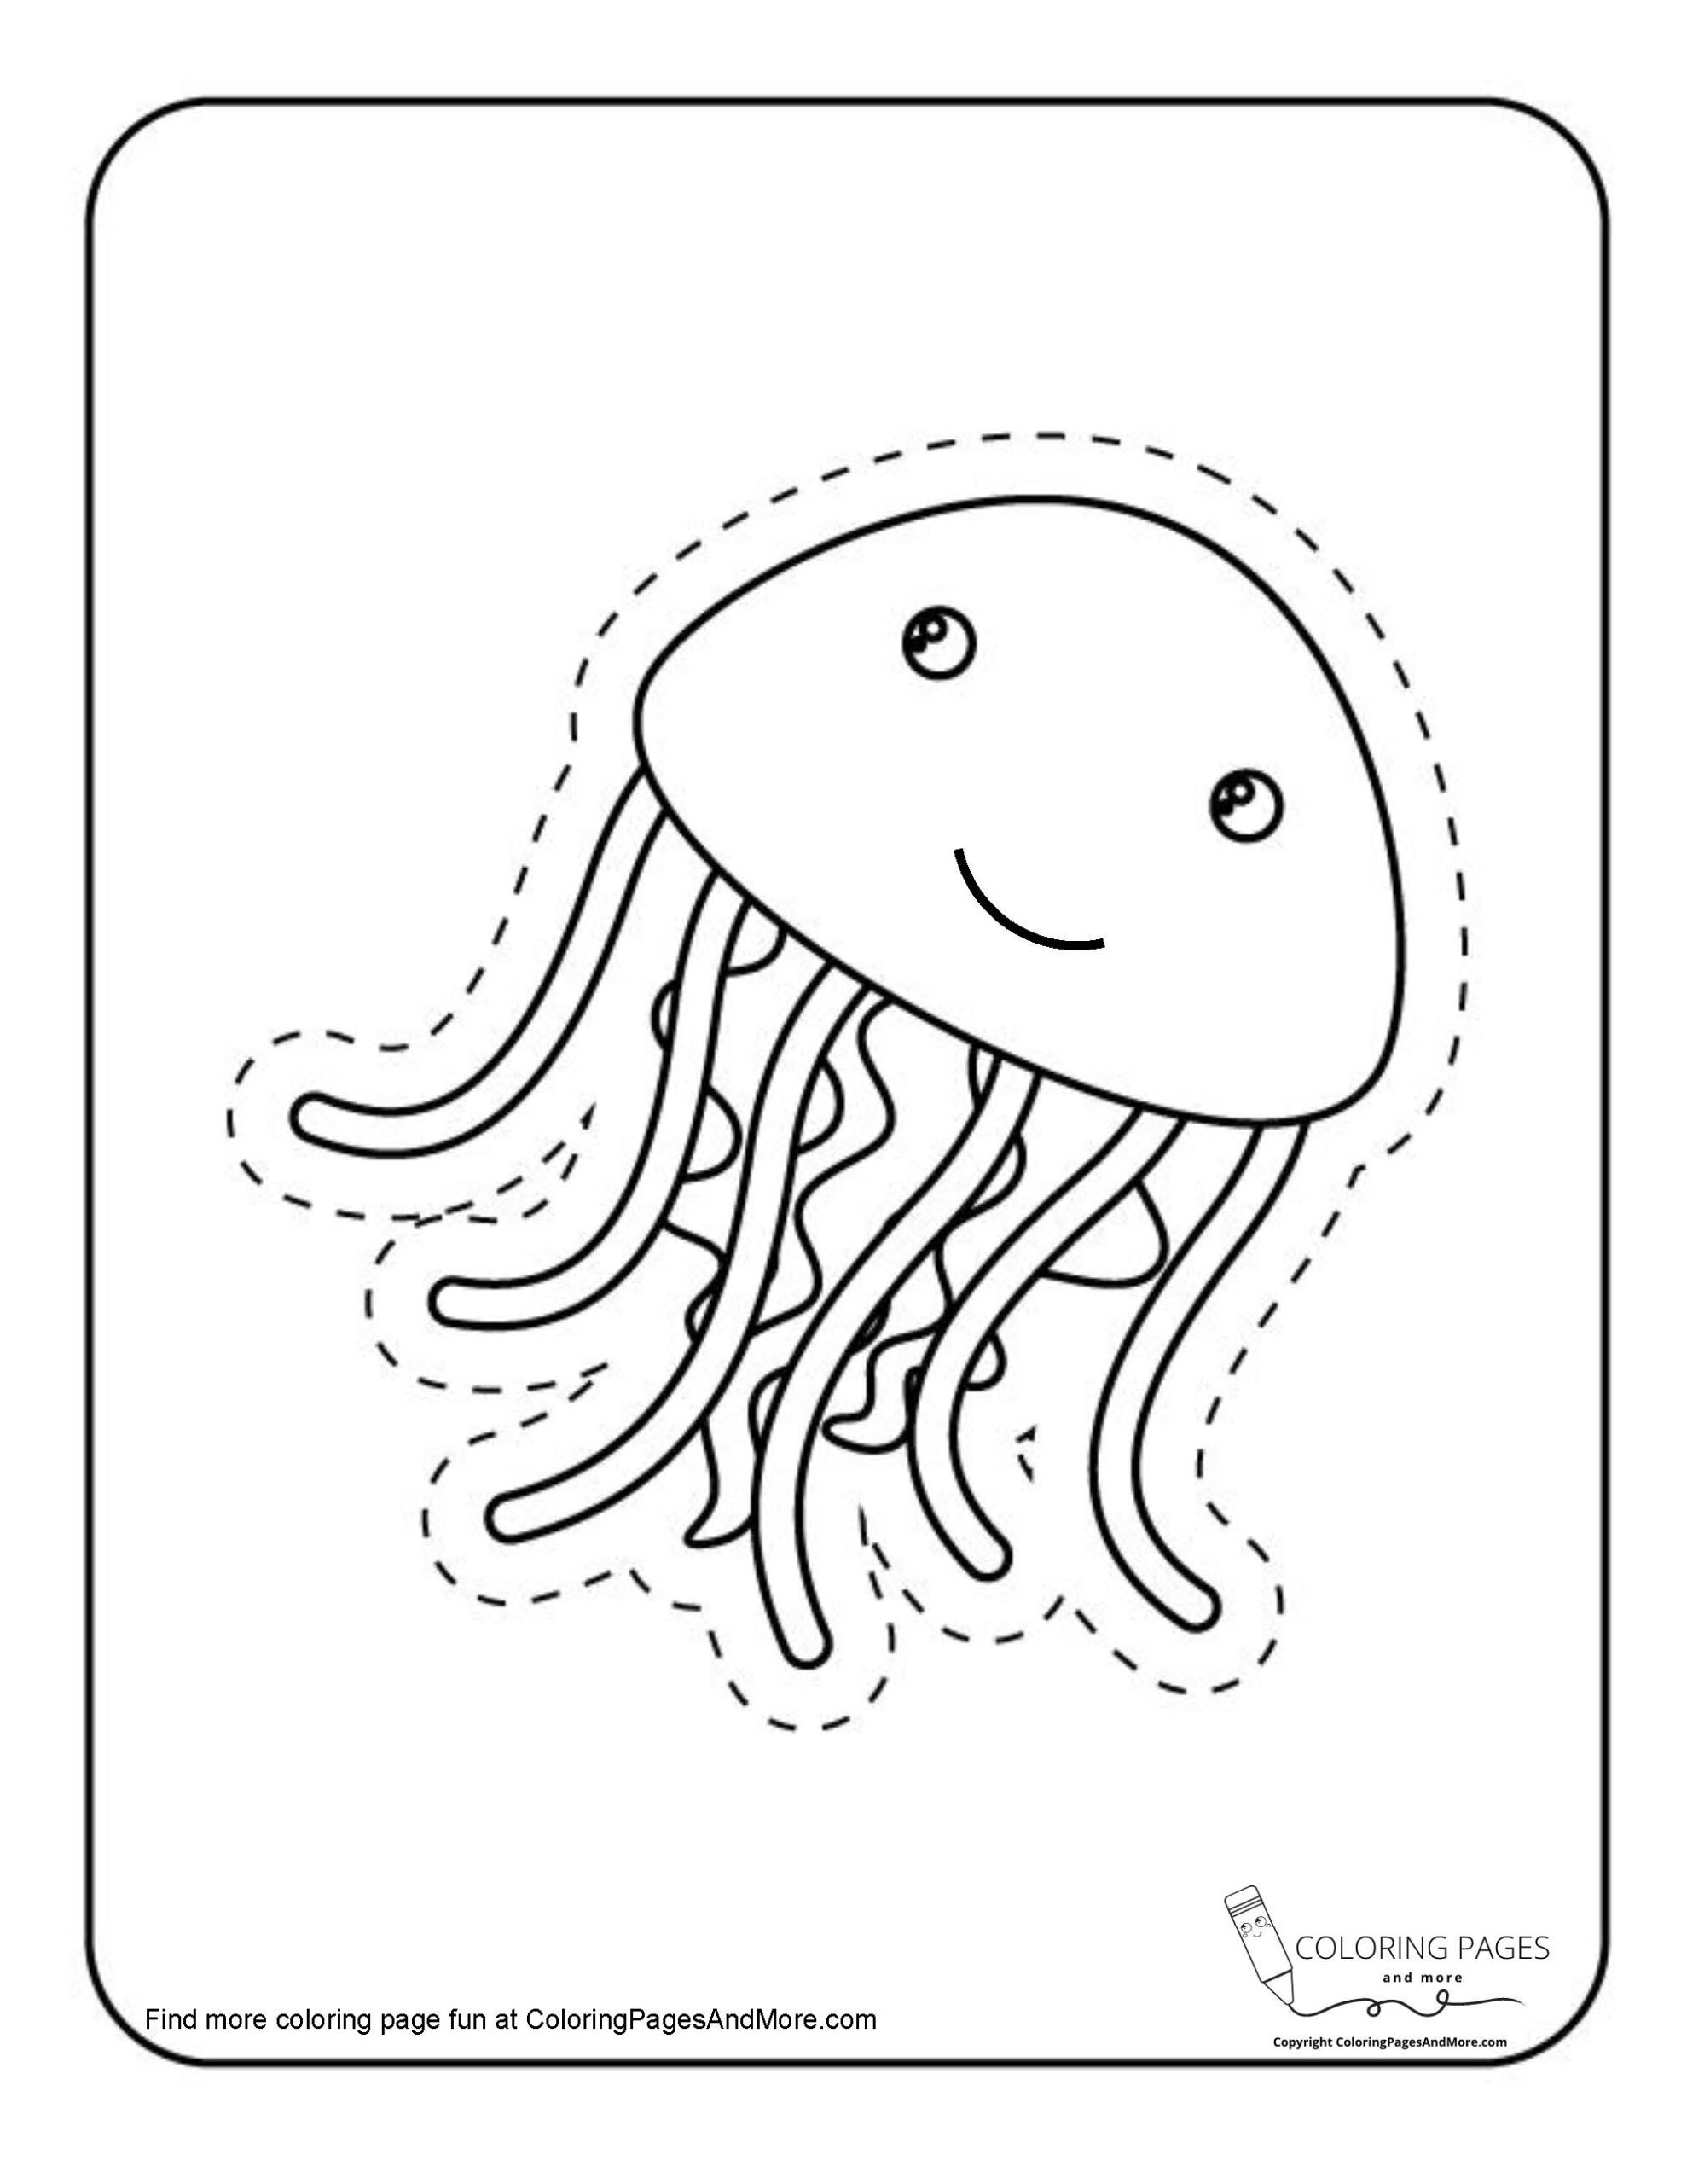 195 Jellyfish Coloring Page Designs: Underwater Beauty in Color 188